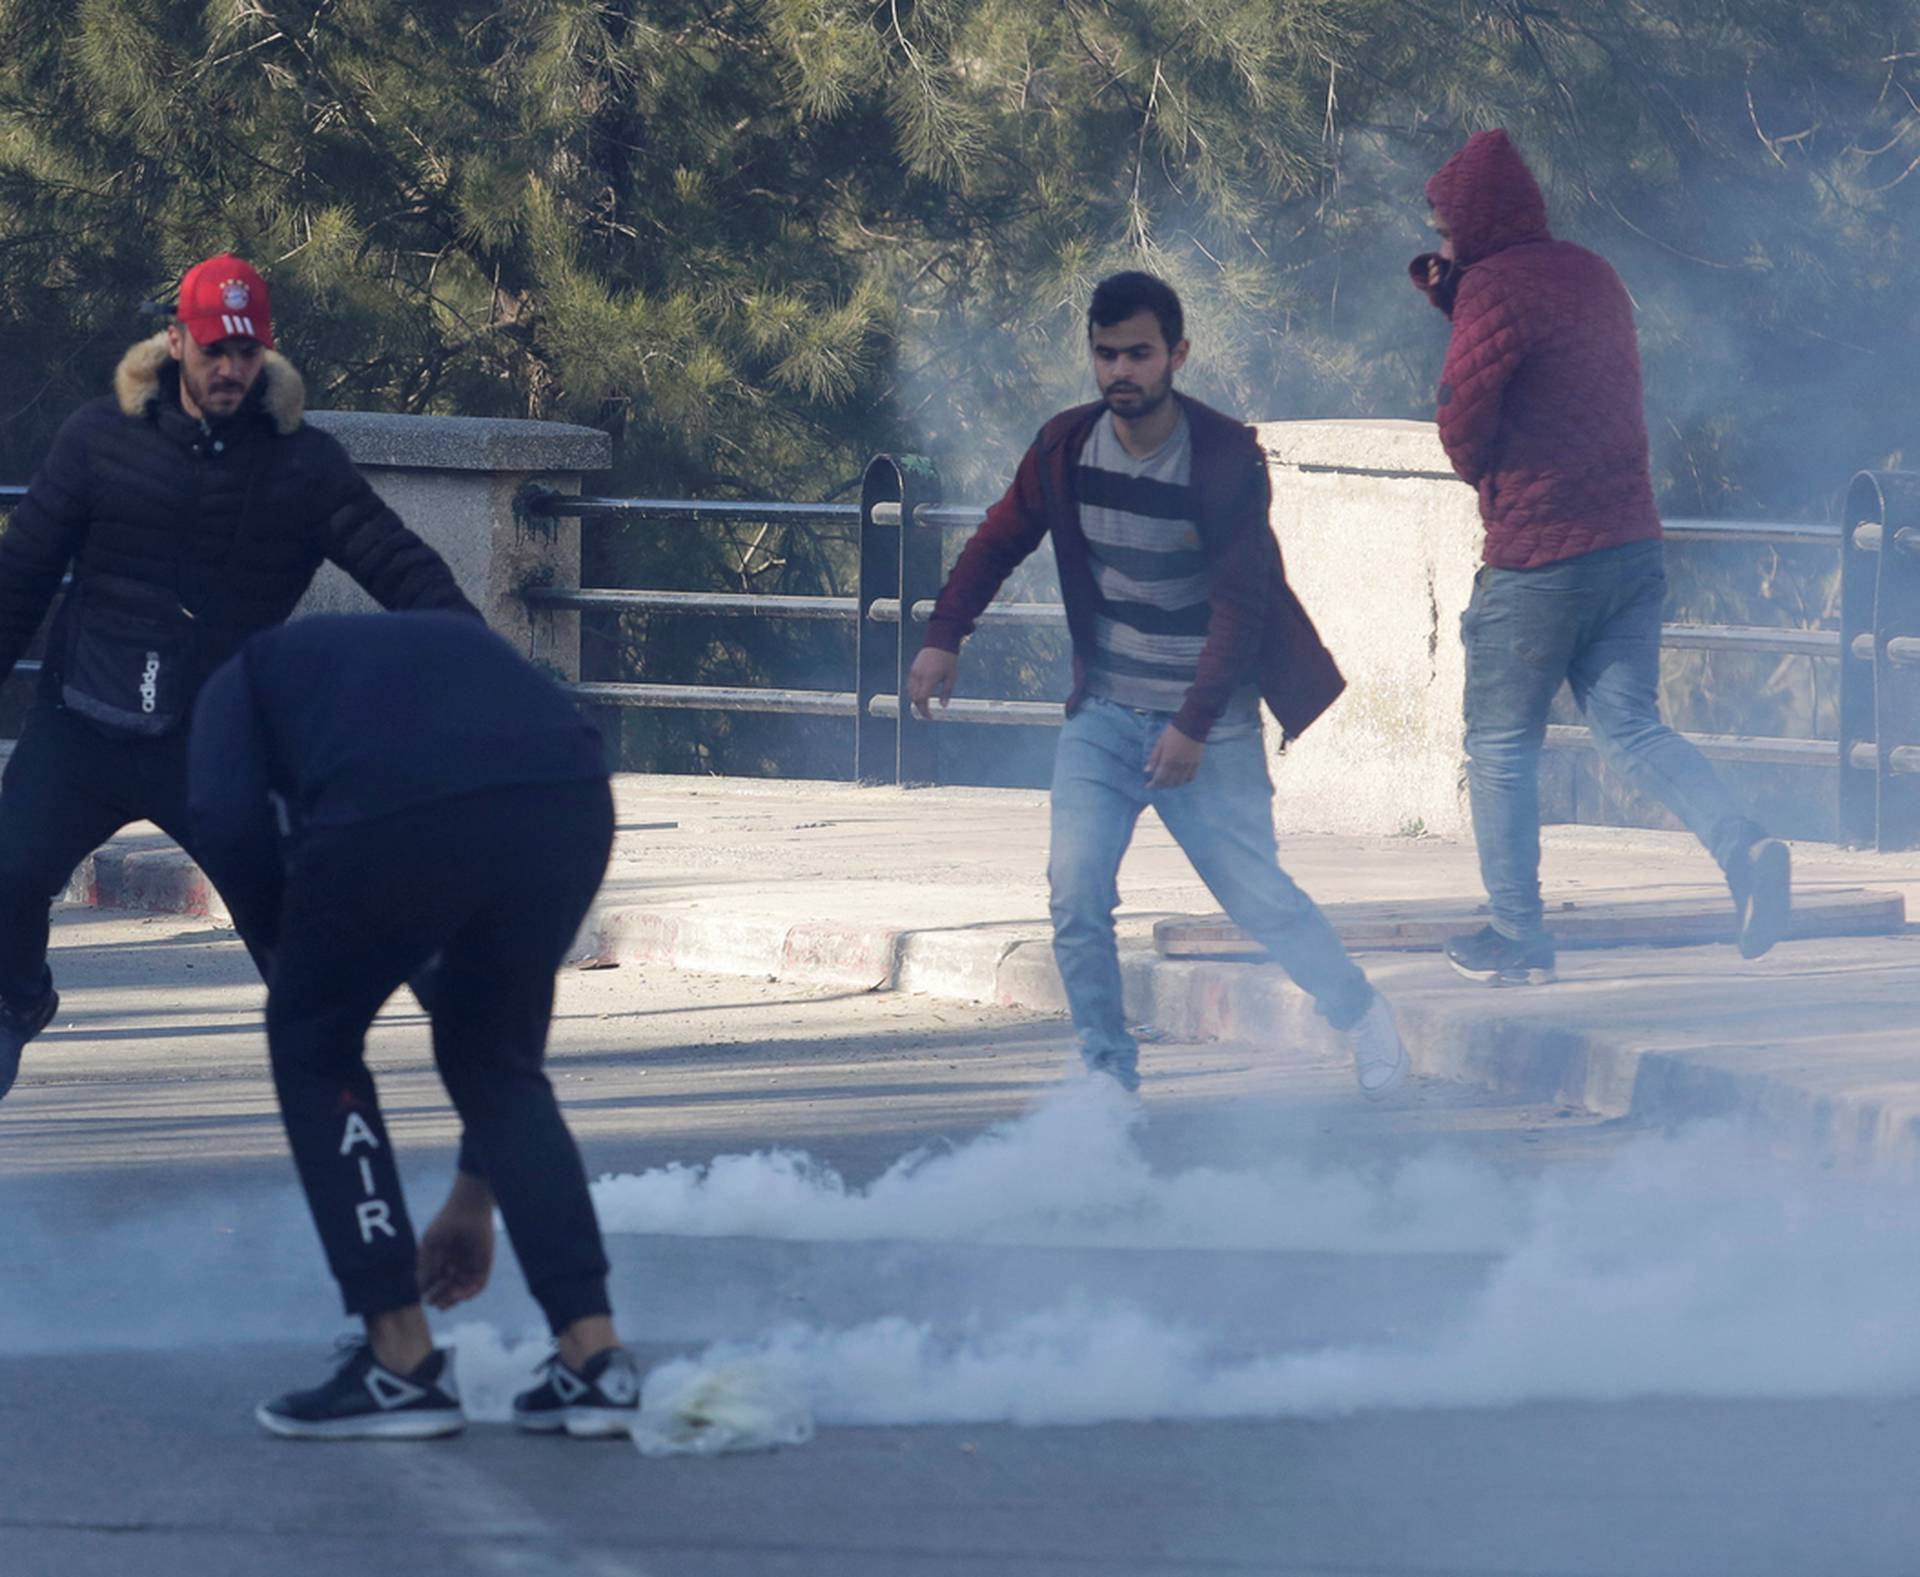 Police use tear gas to disperse crowds as people marched to protest against President Abdelaziz Bouteflika's plan to seek a fifth term in Algiers